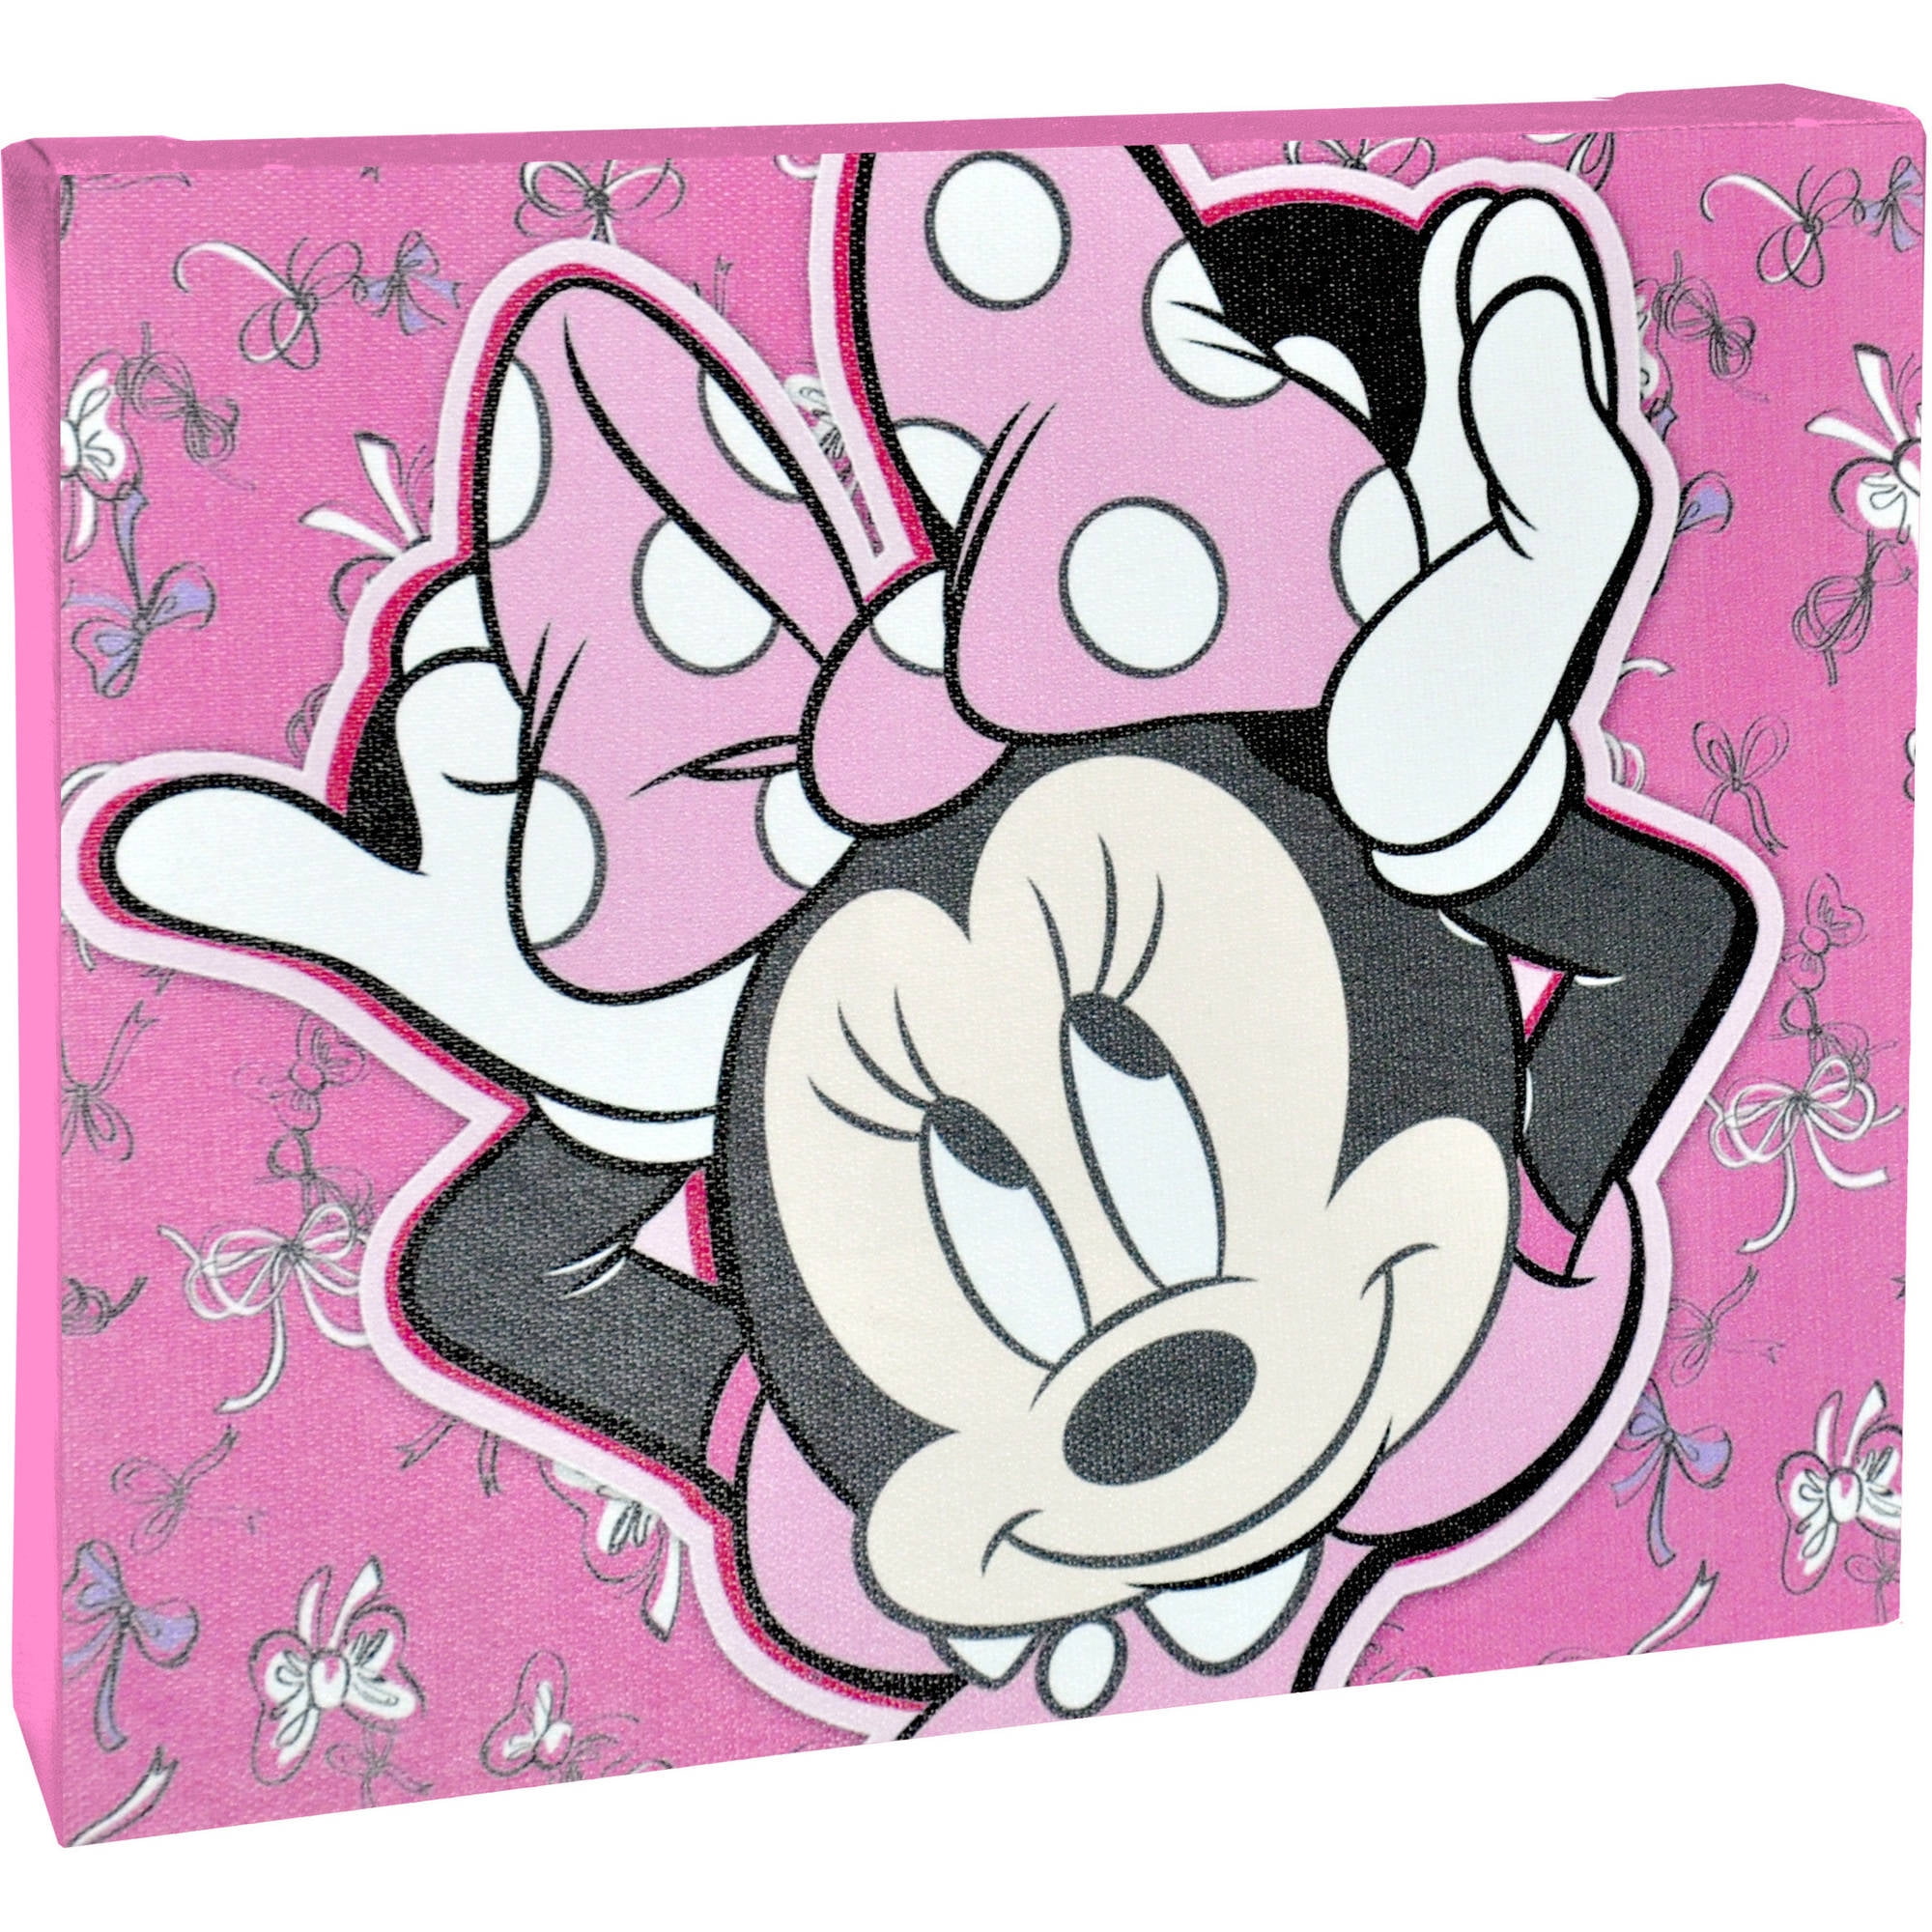 MINNIE MOUSE spotty CANVAS WALL ART PLAQUES/PICTURES 